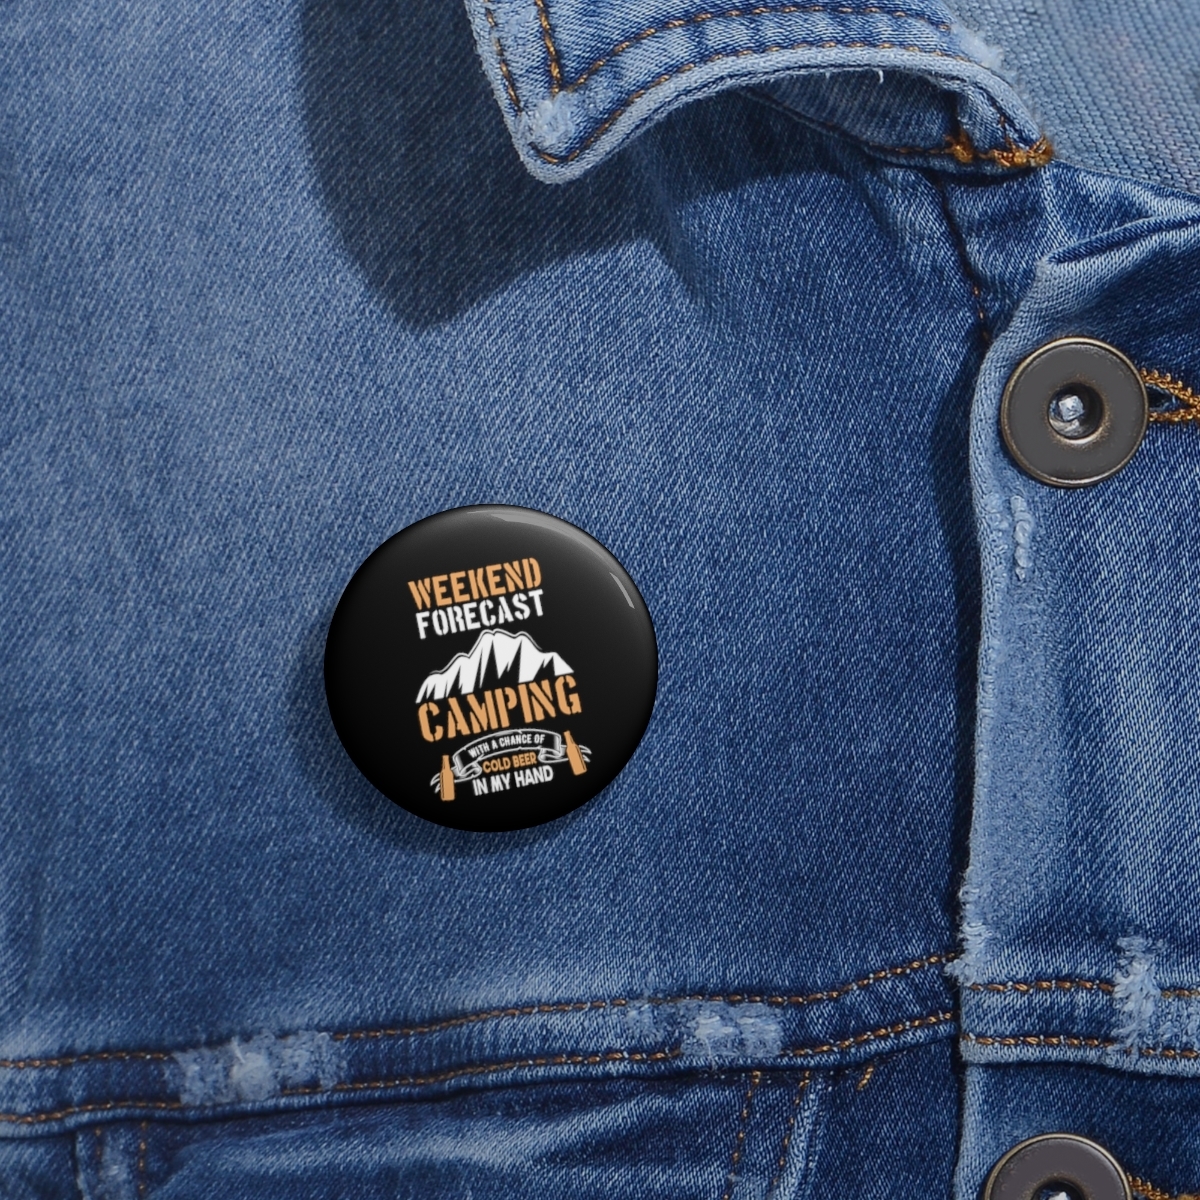 Customizable Printed Metal Pin Buttons Camping with a Chance of Cold Beer Joke - $8.24 - $9.27